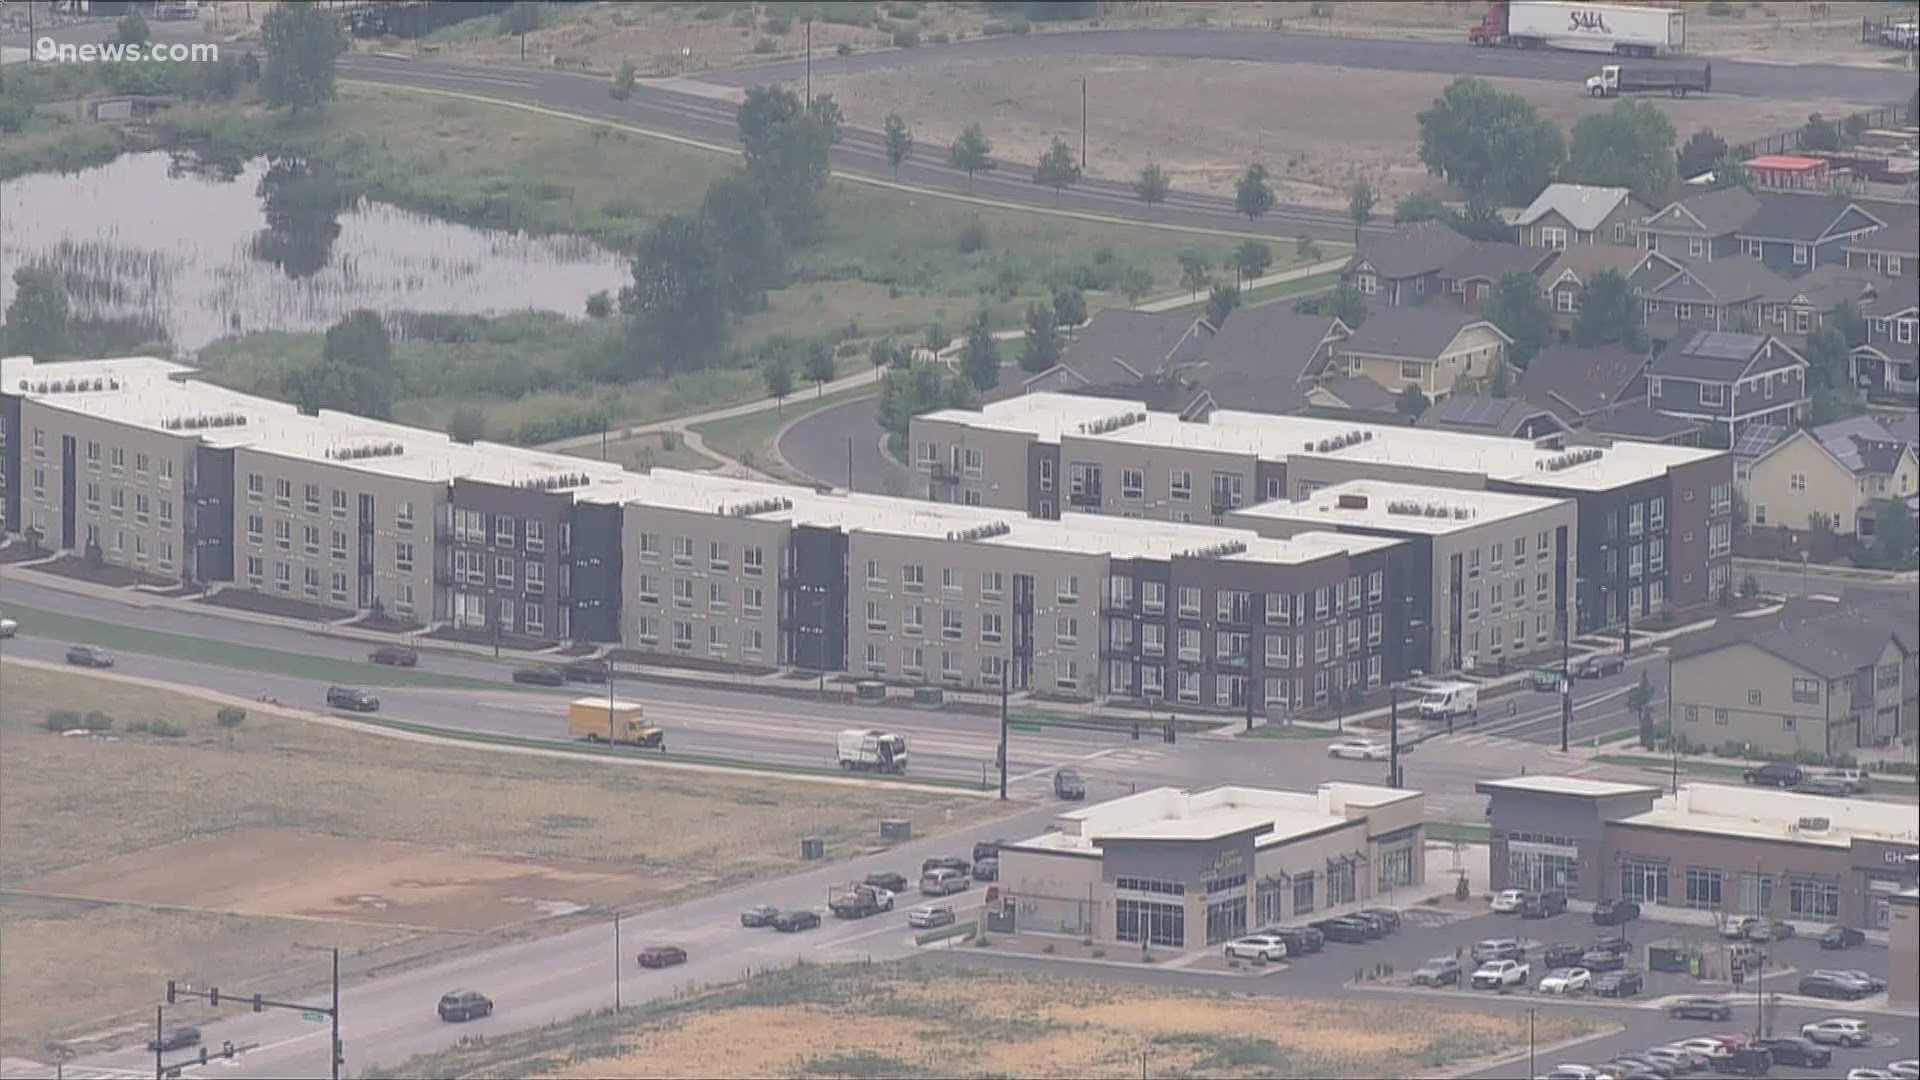 In an effort to provide a path to home ownership, Denver opened 132 income-restricted condominiums in the Central Park neighborhood Wednesday, officials announced.